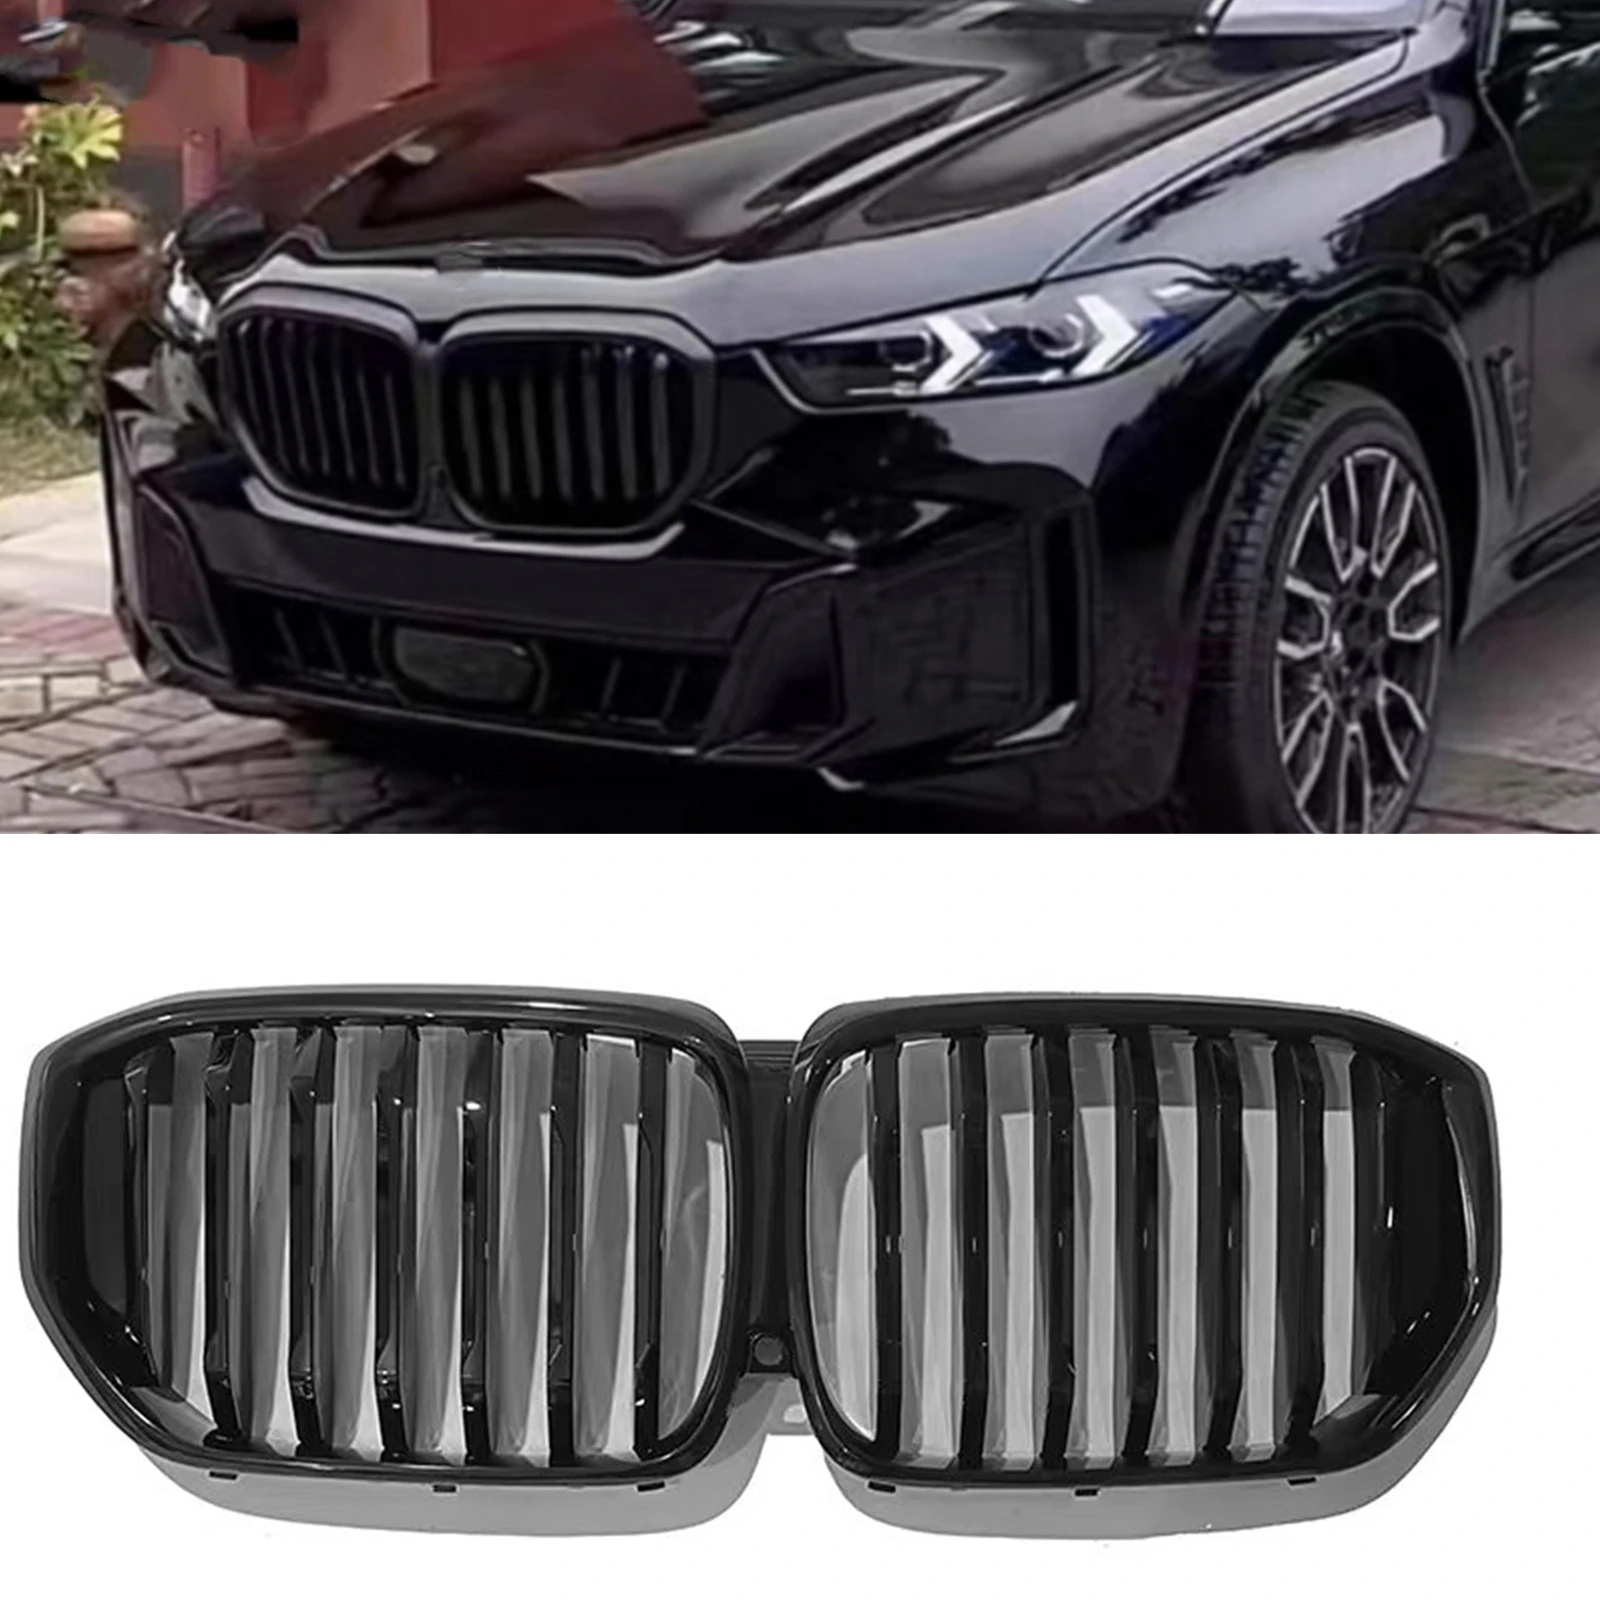 

Front Grille Racing Grill For BMW G05 LCI X5 2023-2024 Single Slat Style Black Car Upper Bumper Hood Mesh Grid With Camera Hole